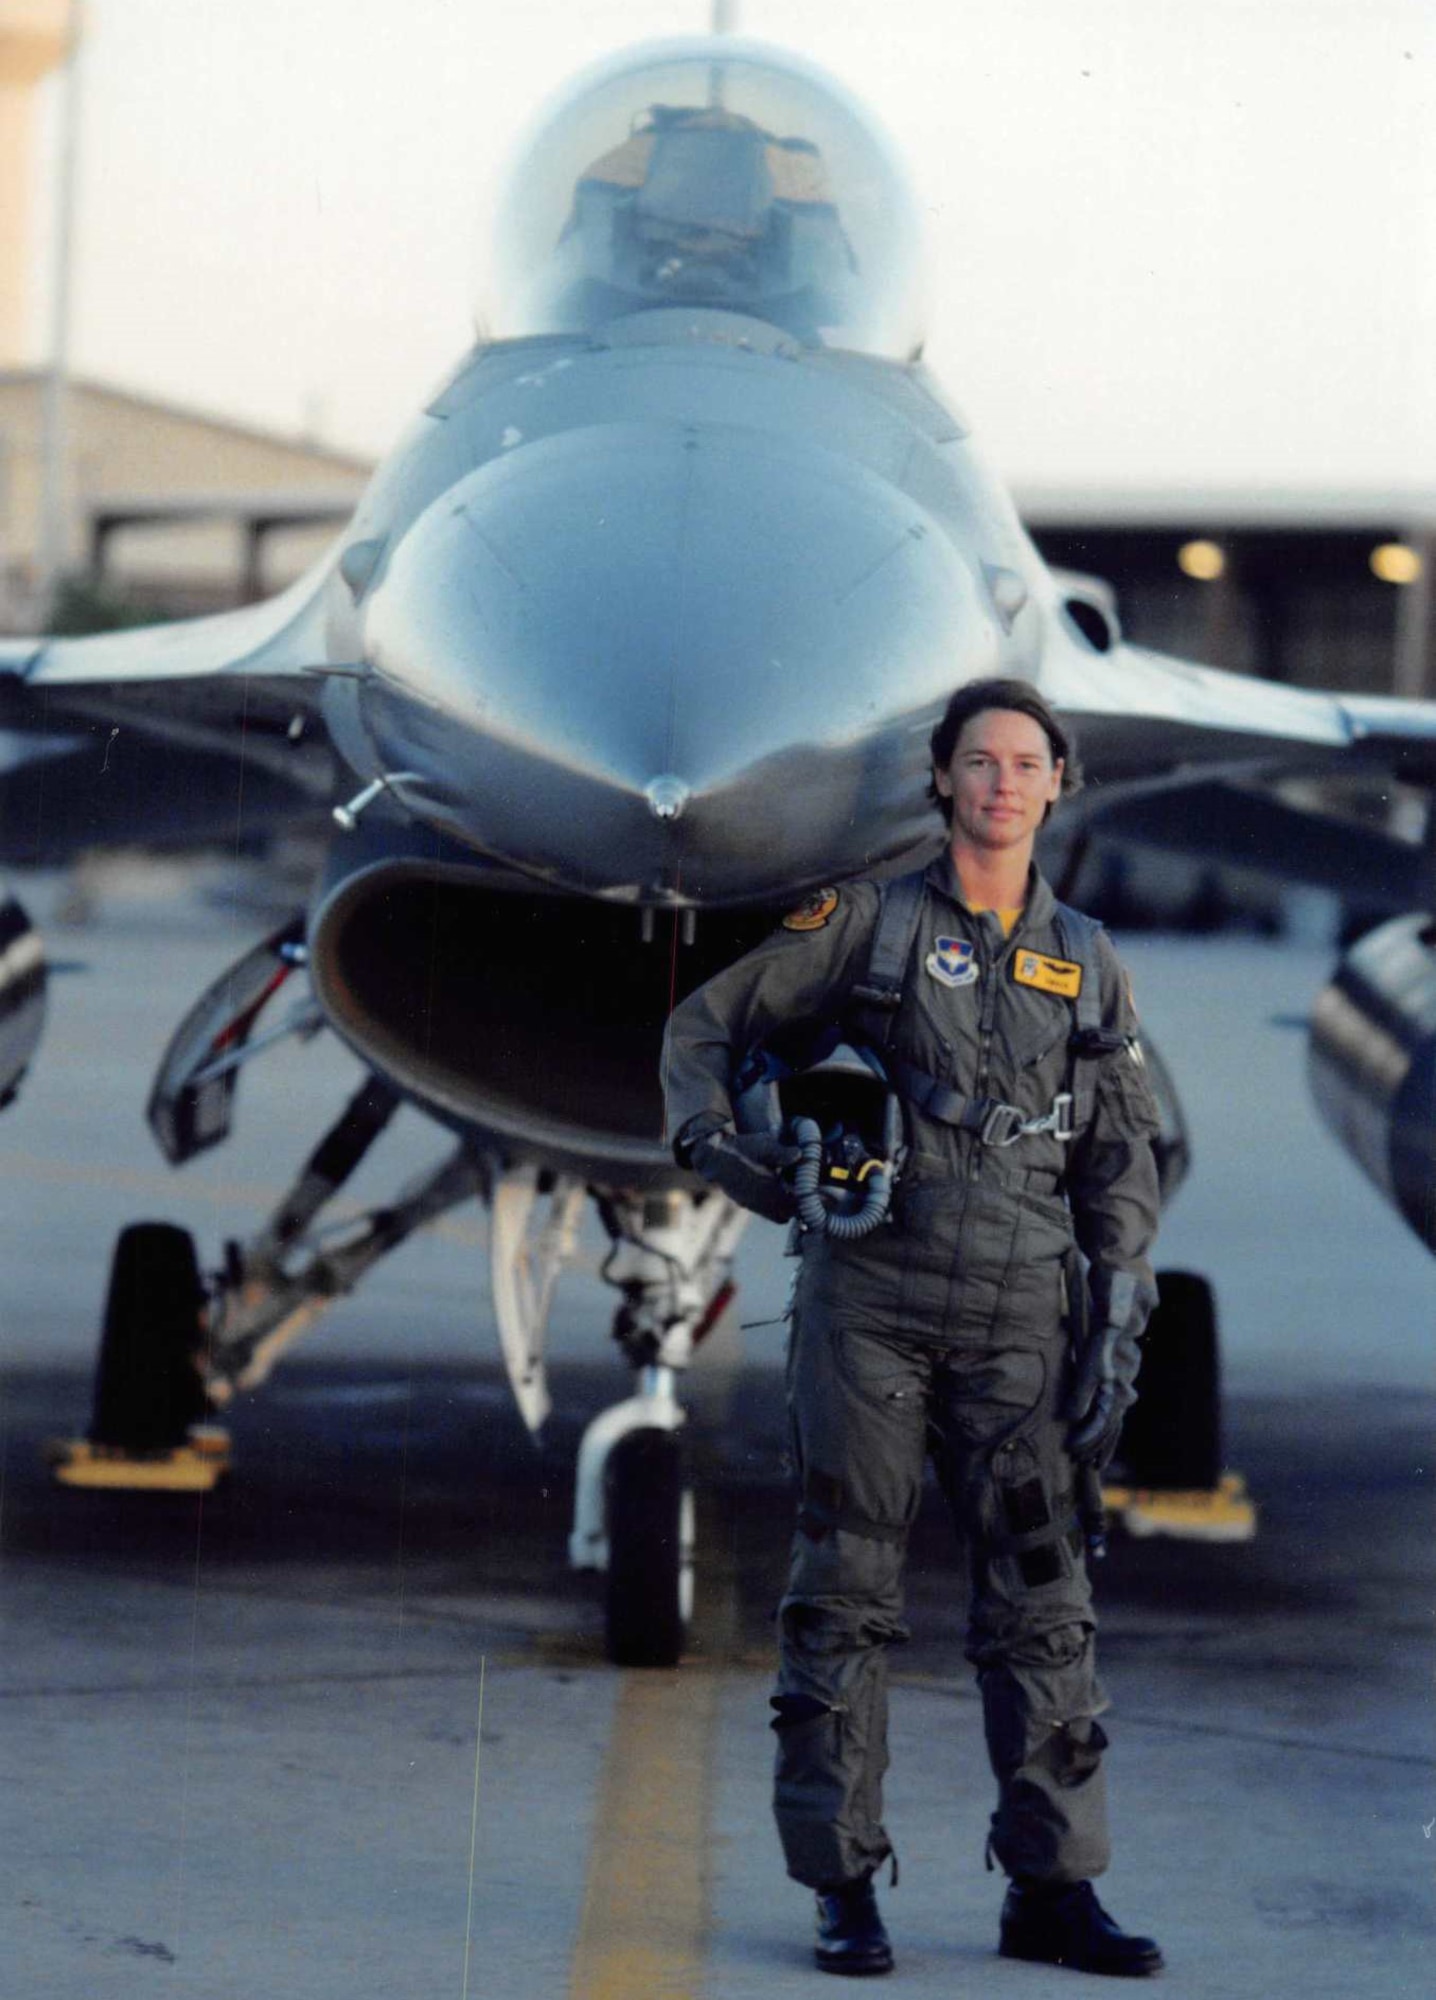 Then-Capt. Sherrie McCandless, an Air Force pilot, poses in front of an F-16 Fighting Falcon in the mid-1990s.